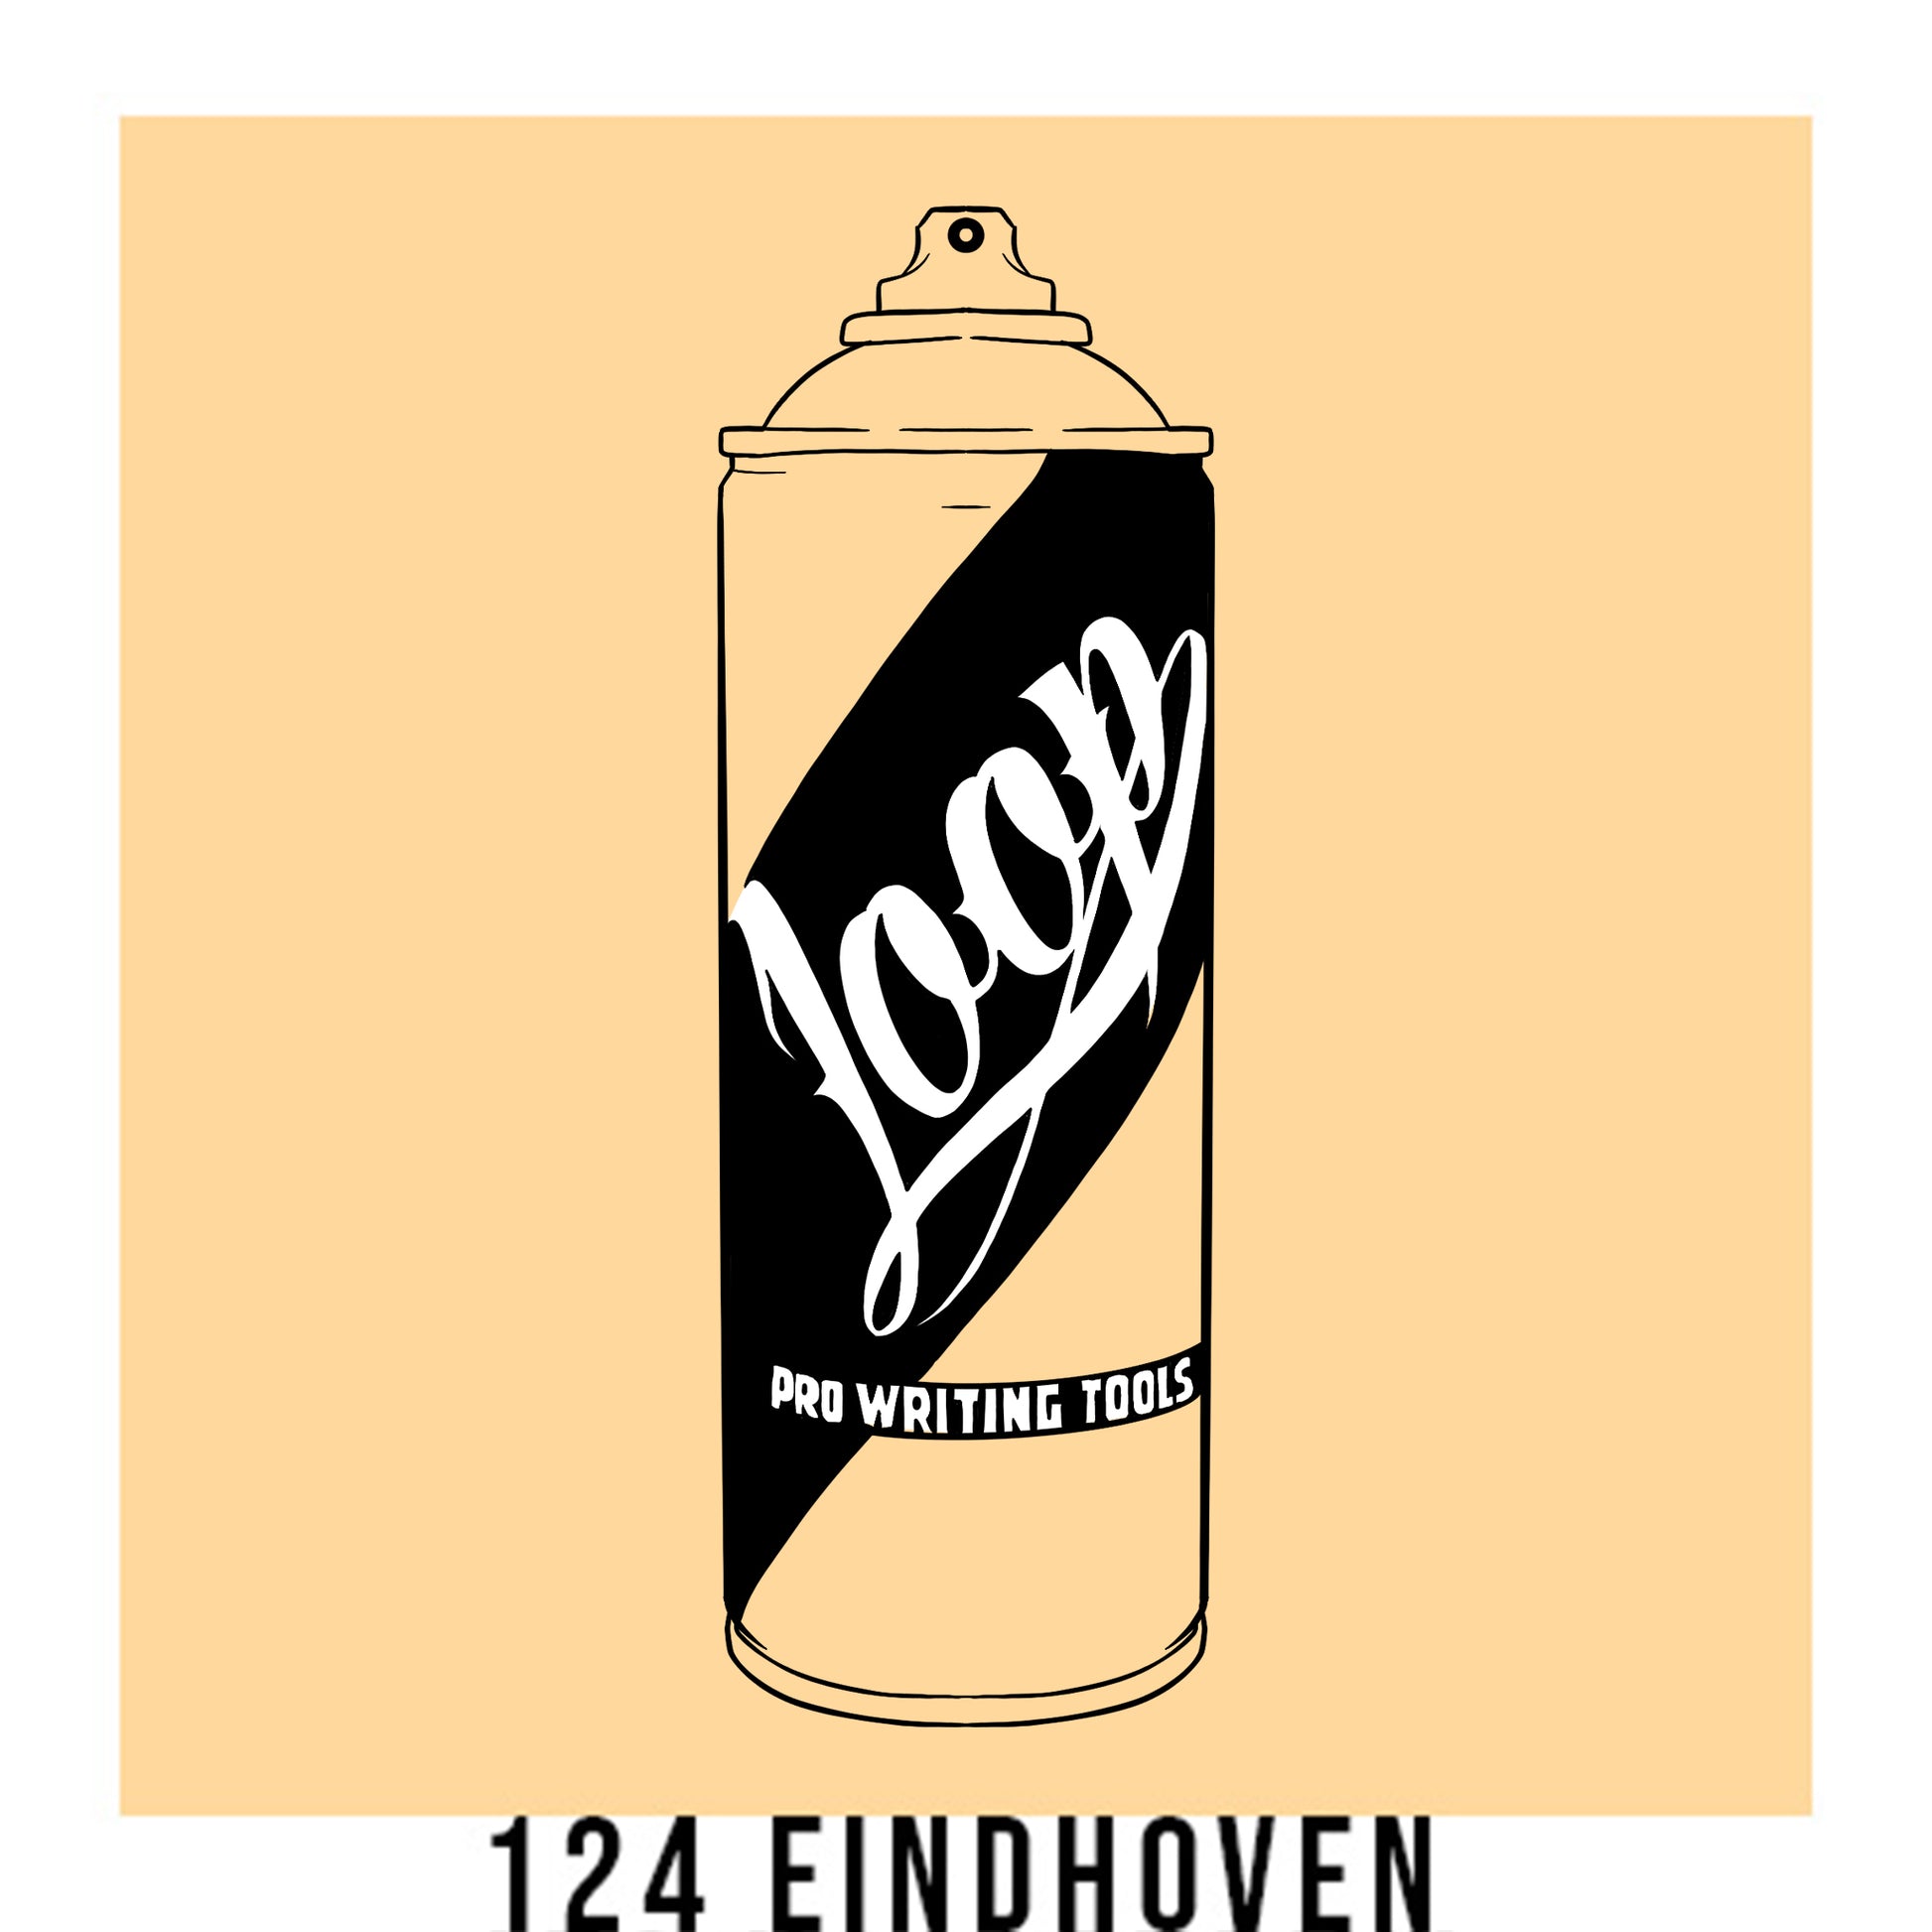 A black outline drawing of a cream spray paint can with the word "Loop" written on the face in script. The background is a color swatch of the same cream with a white border with the words "124 Eindhoven" at the bottom.